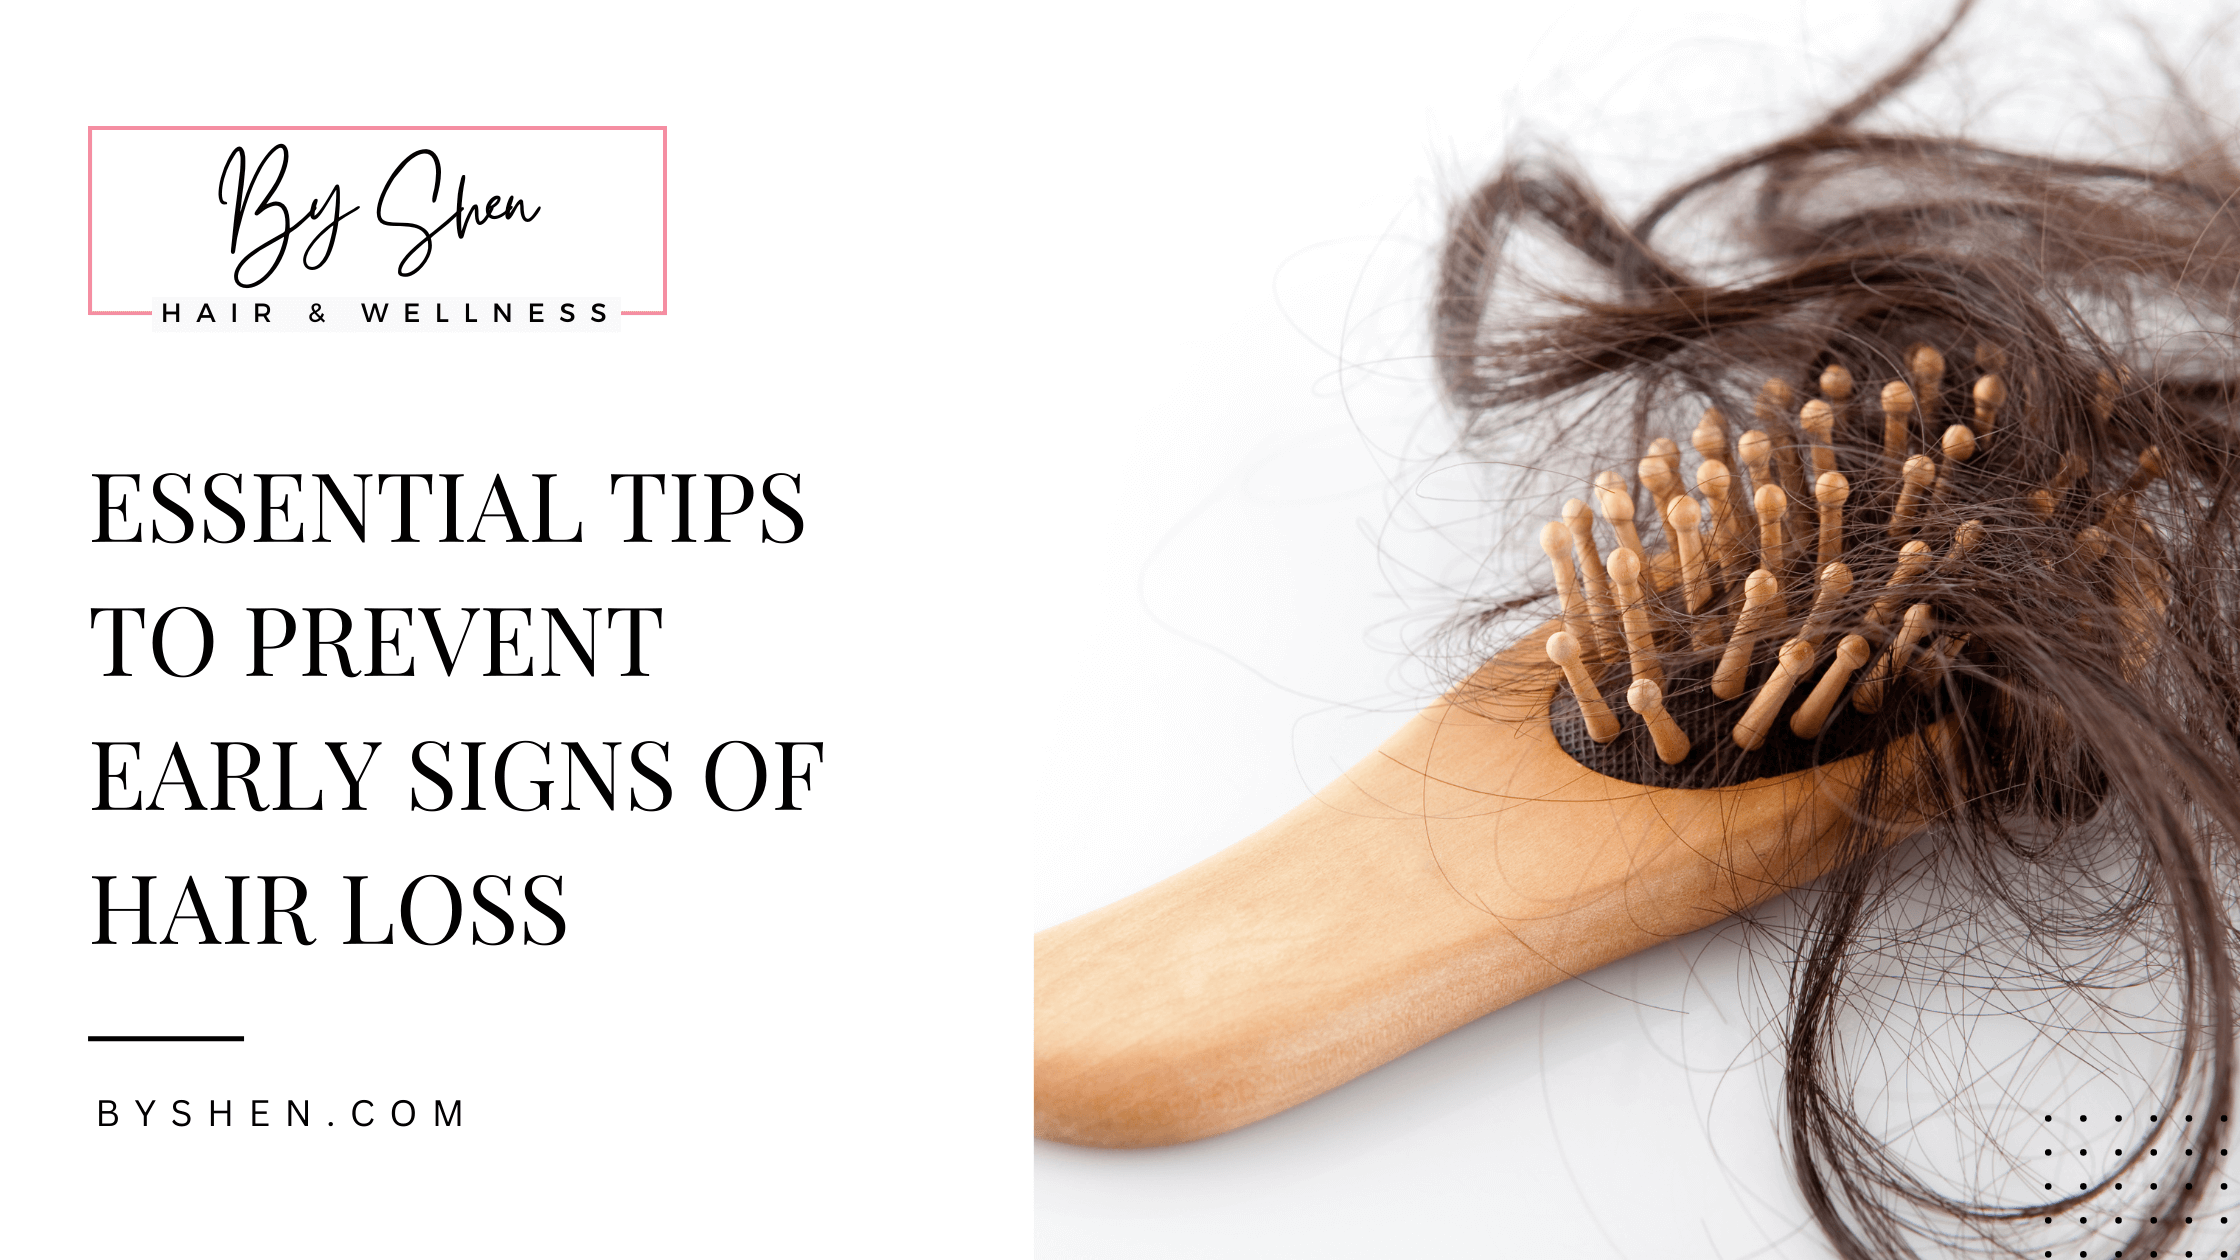 Featured image for “Essential Tips To Prevent Early Signs of Hair Loss”